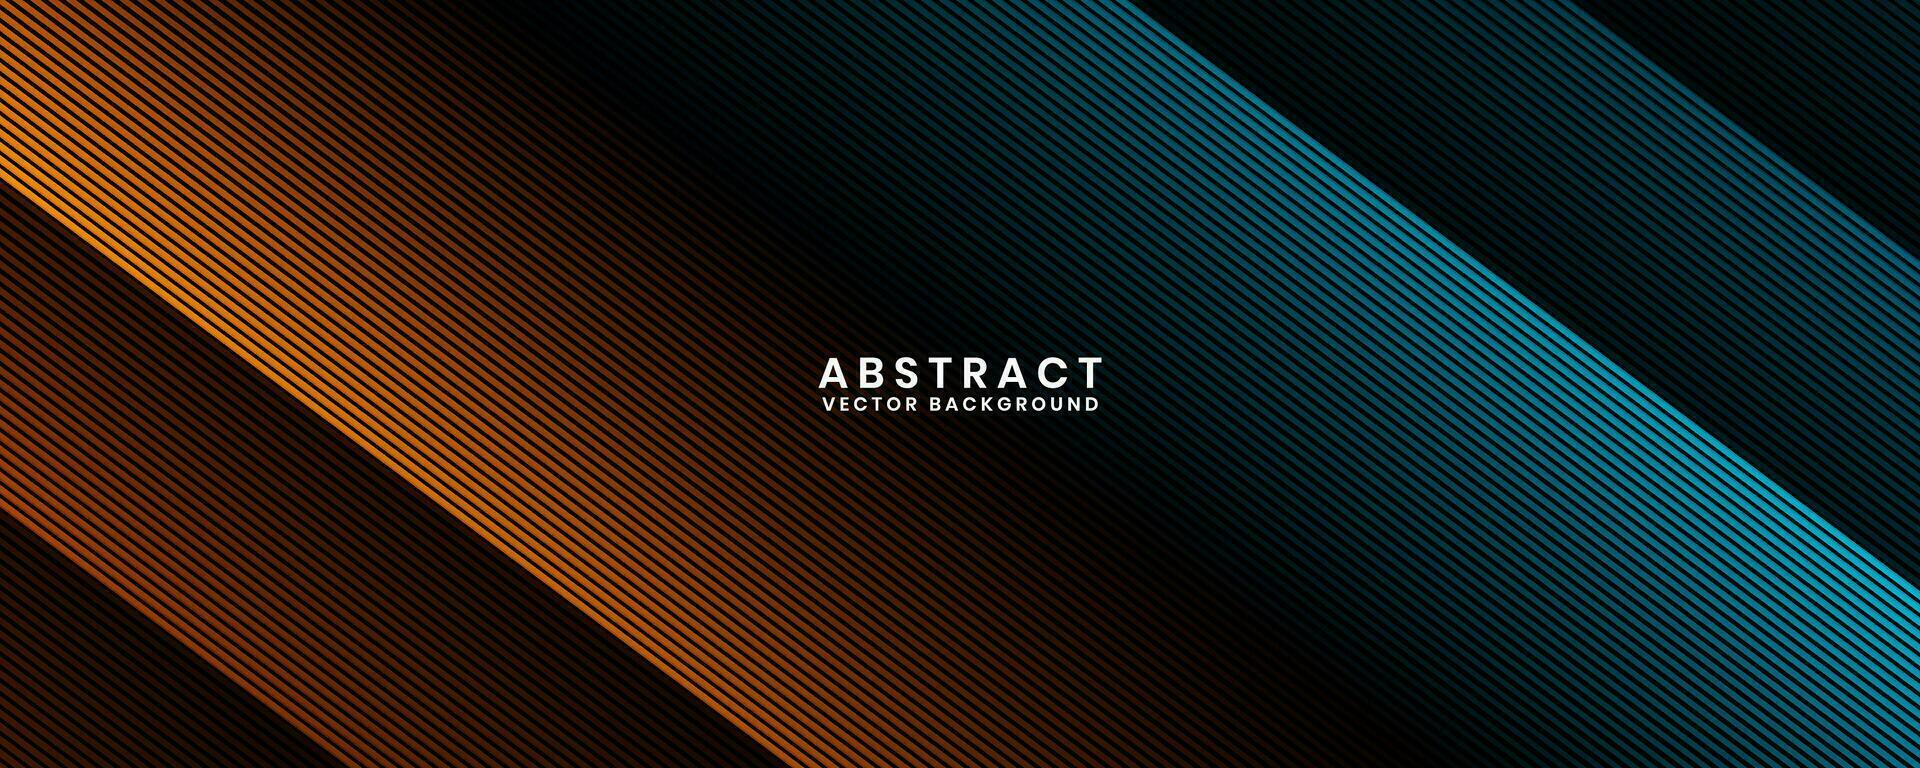 3D orange blue techno abstract background overlap layer on dark space with glowing lines decoration. Modern graphic design element future style concept for banner, flyer, card, or brochure cover vector